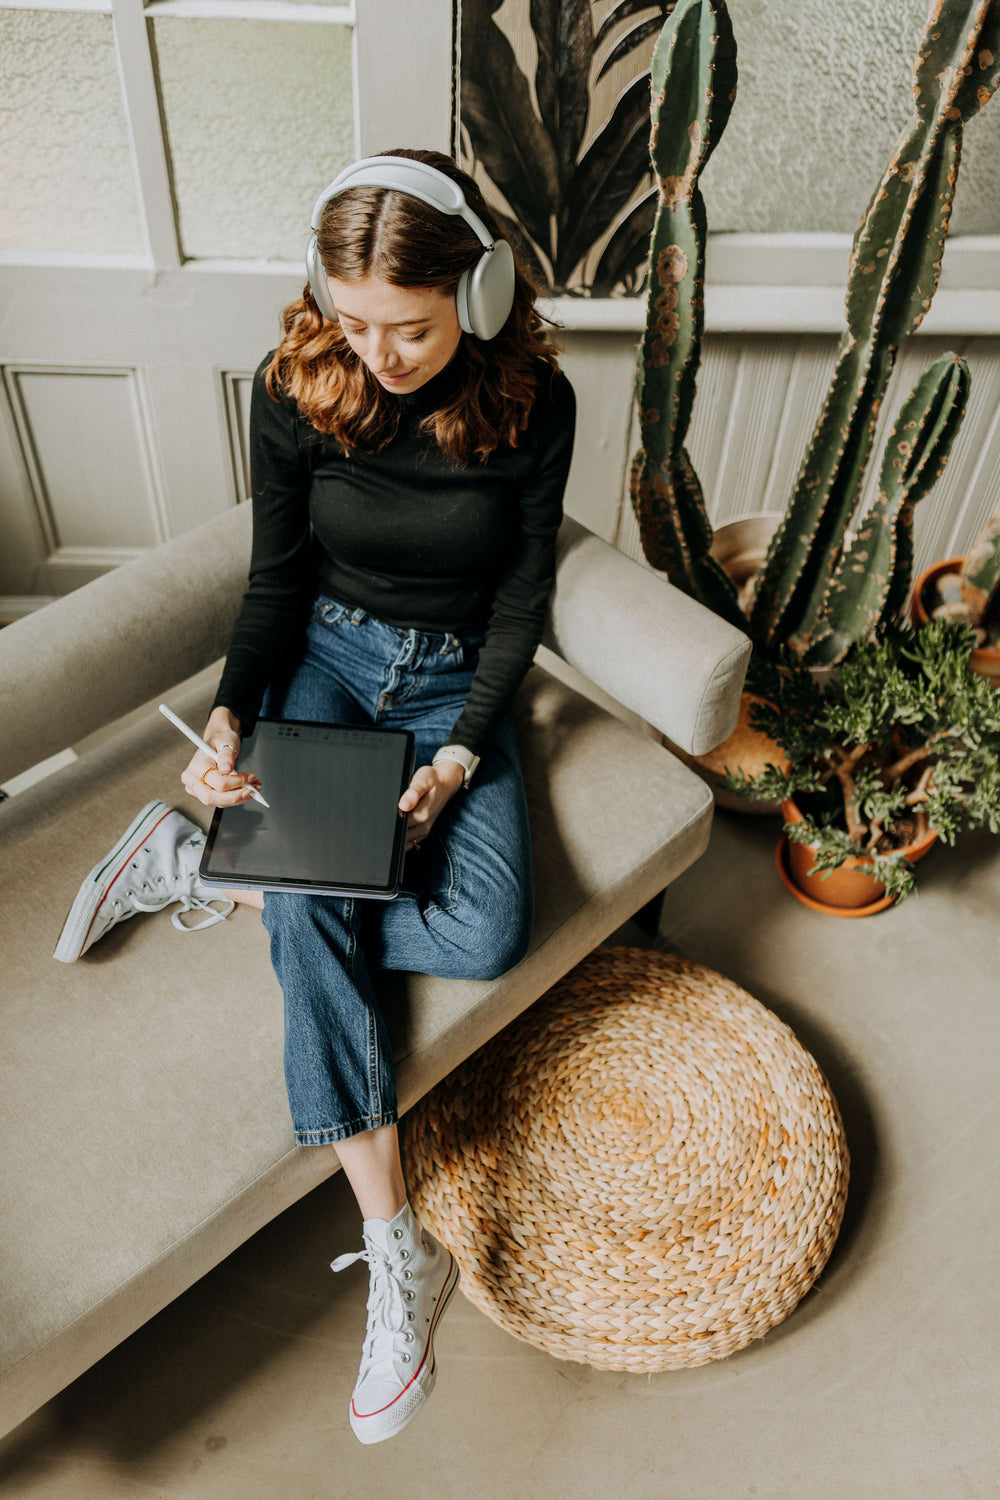 Kirstin from KDigitalStudio is lounging on a couch while wearing Airpod Max headphones and writing on the iPad. She is surrounded by plants.